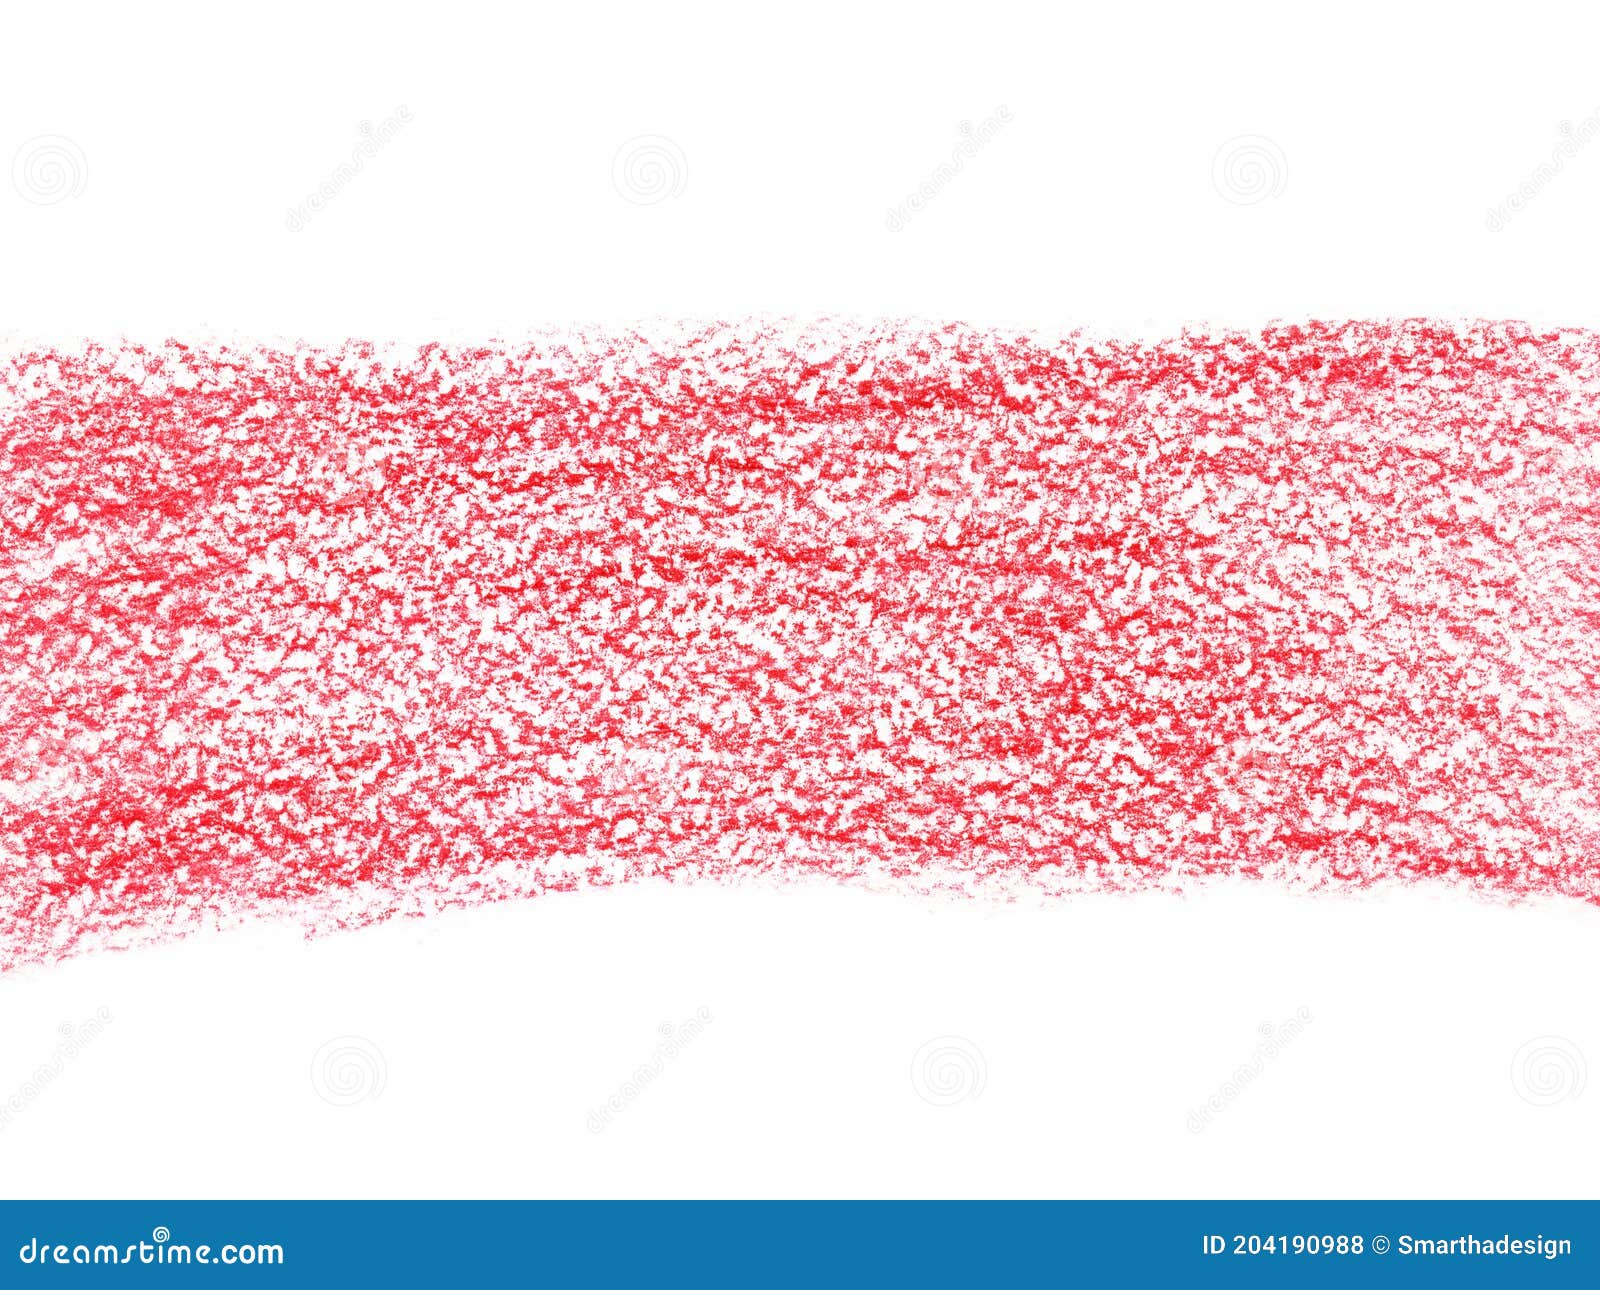 Red Crayon Texture Images – Browse 87,927 Stock Photos, Vectors